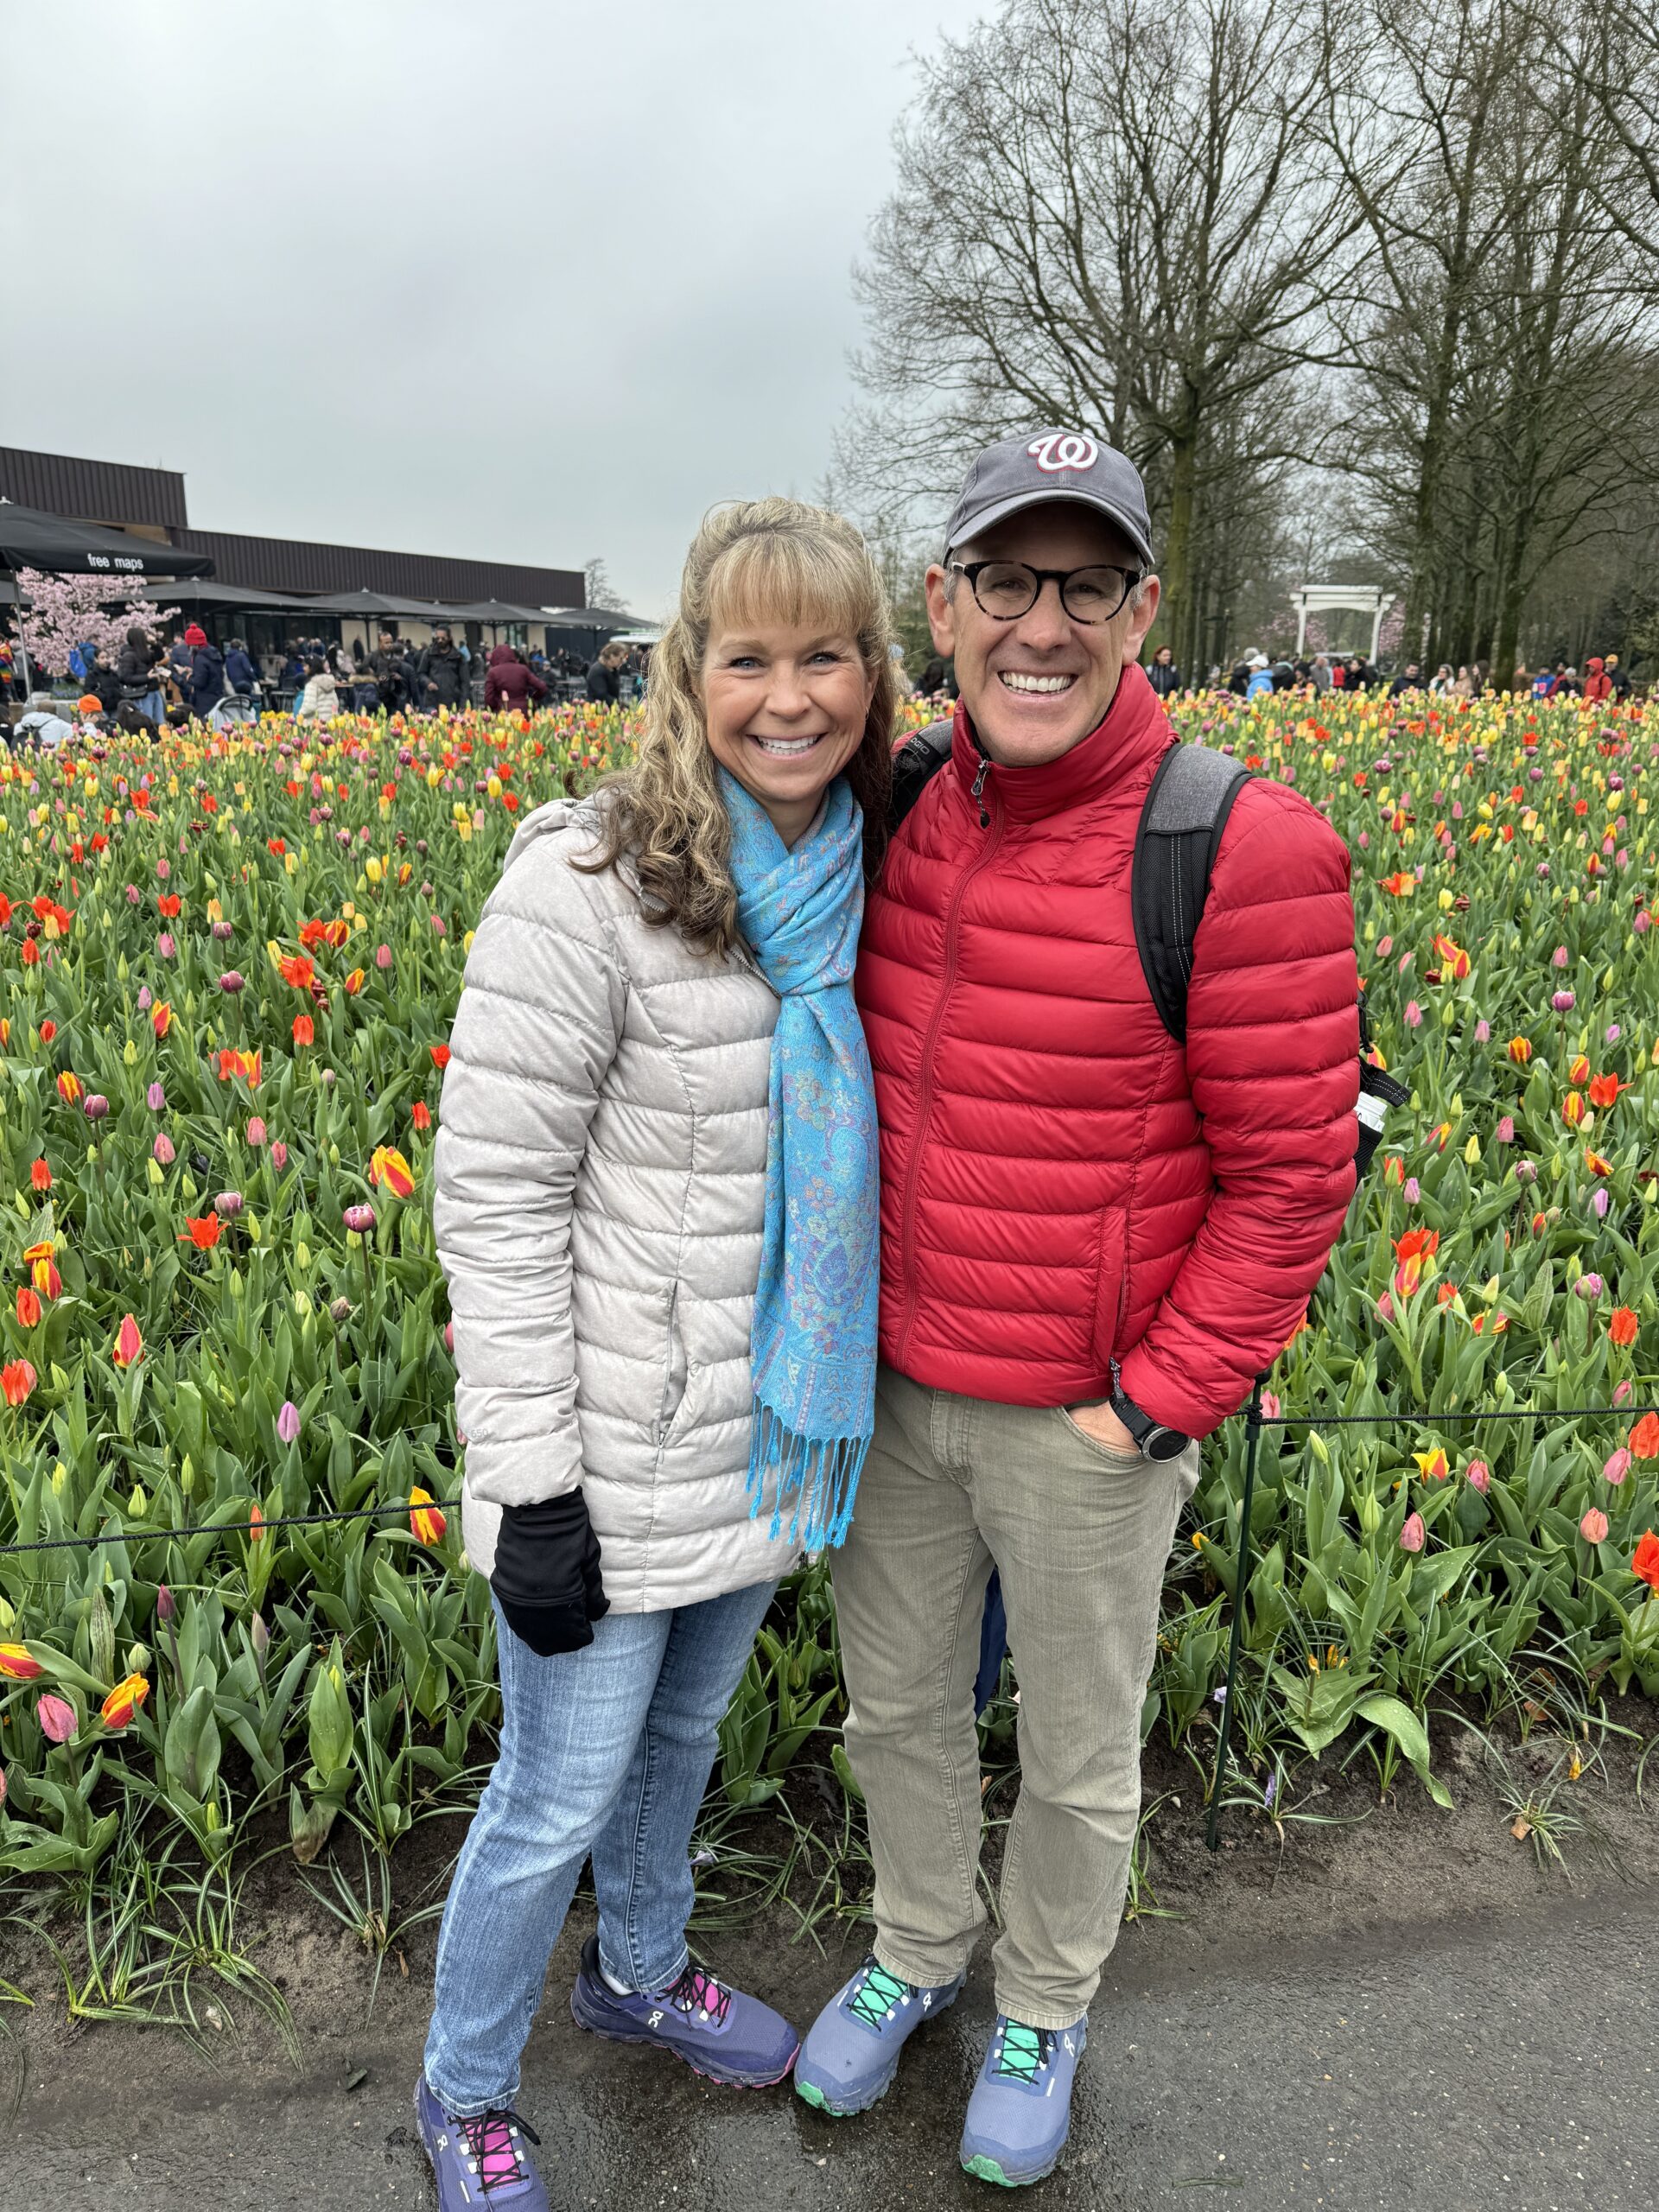 Spring tulips in The Netherlands - one of our favorite parts of the trip and a highlight of all visitors from across the world this time of year in The Netherlands and Belgium.